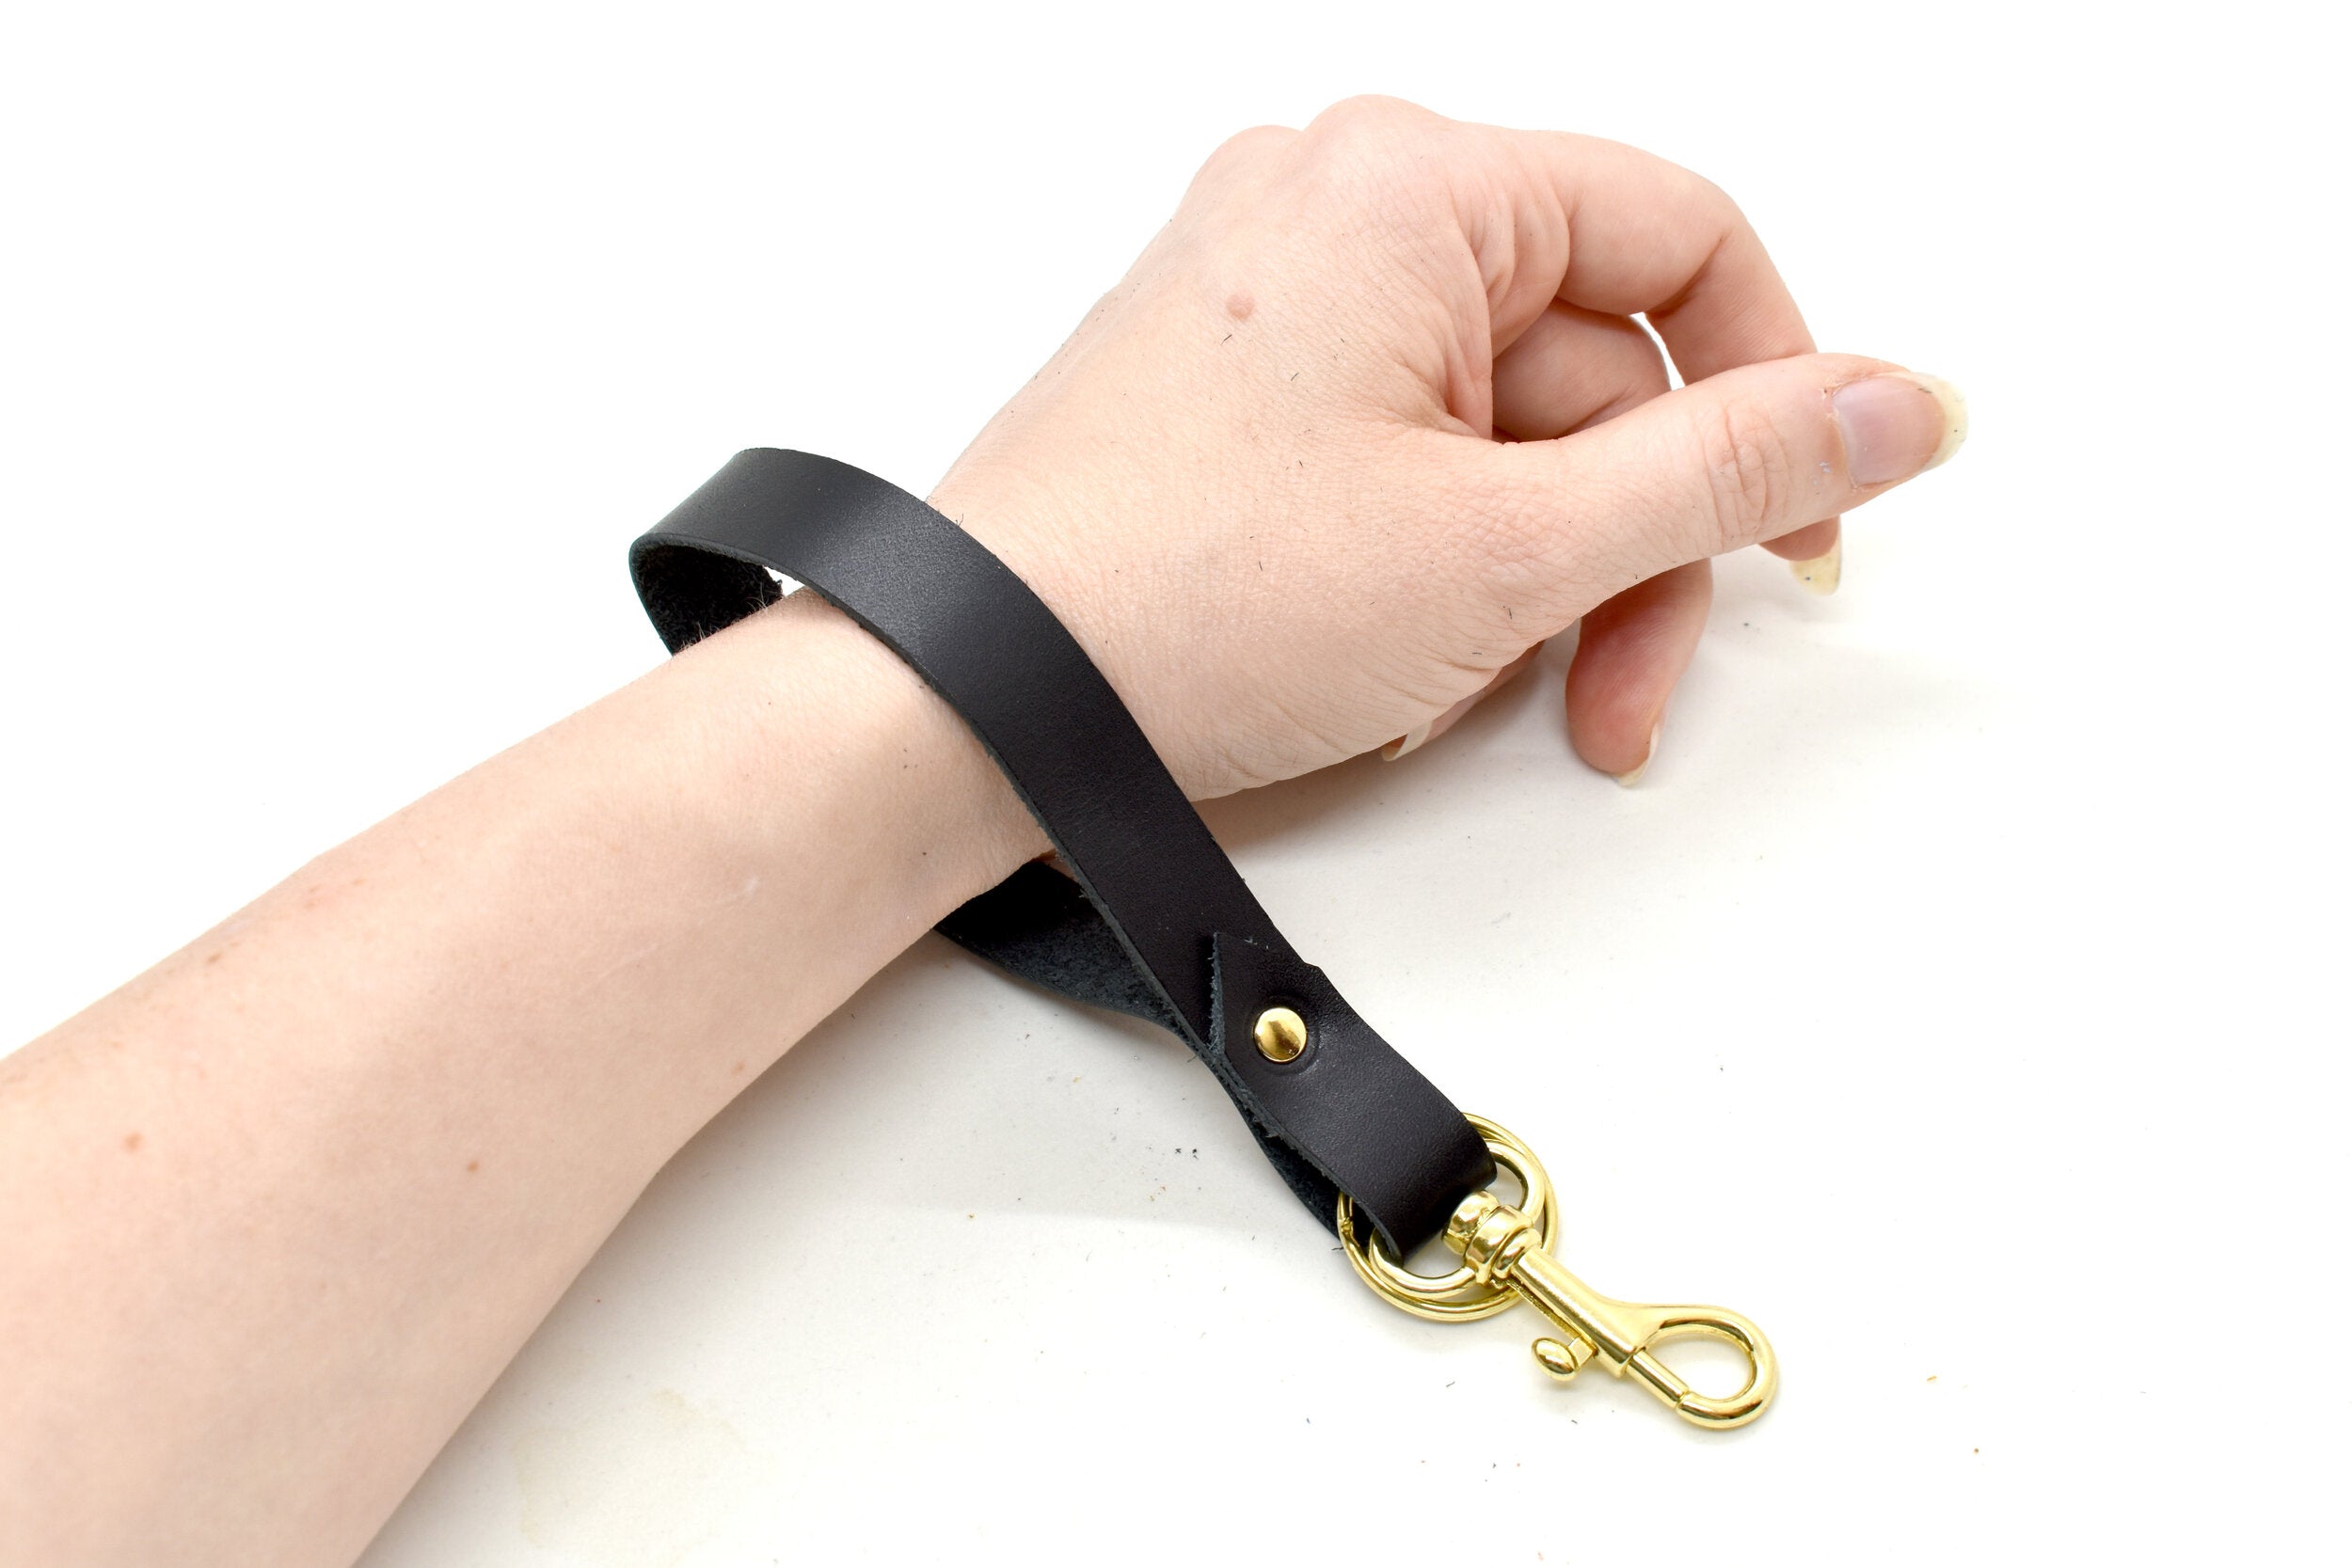 authentic leather in black with gold keyring and handbag clasp.